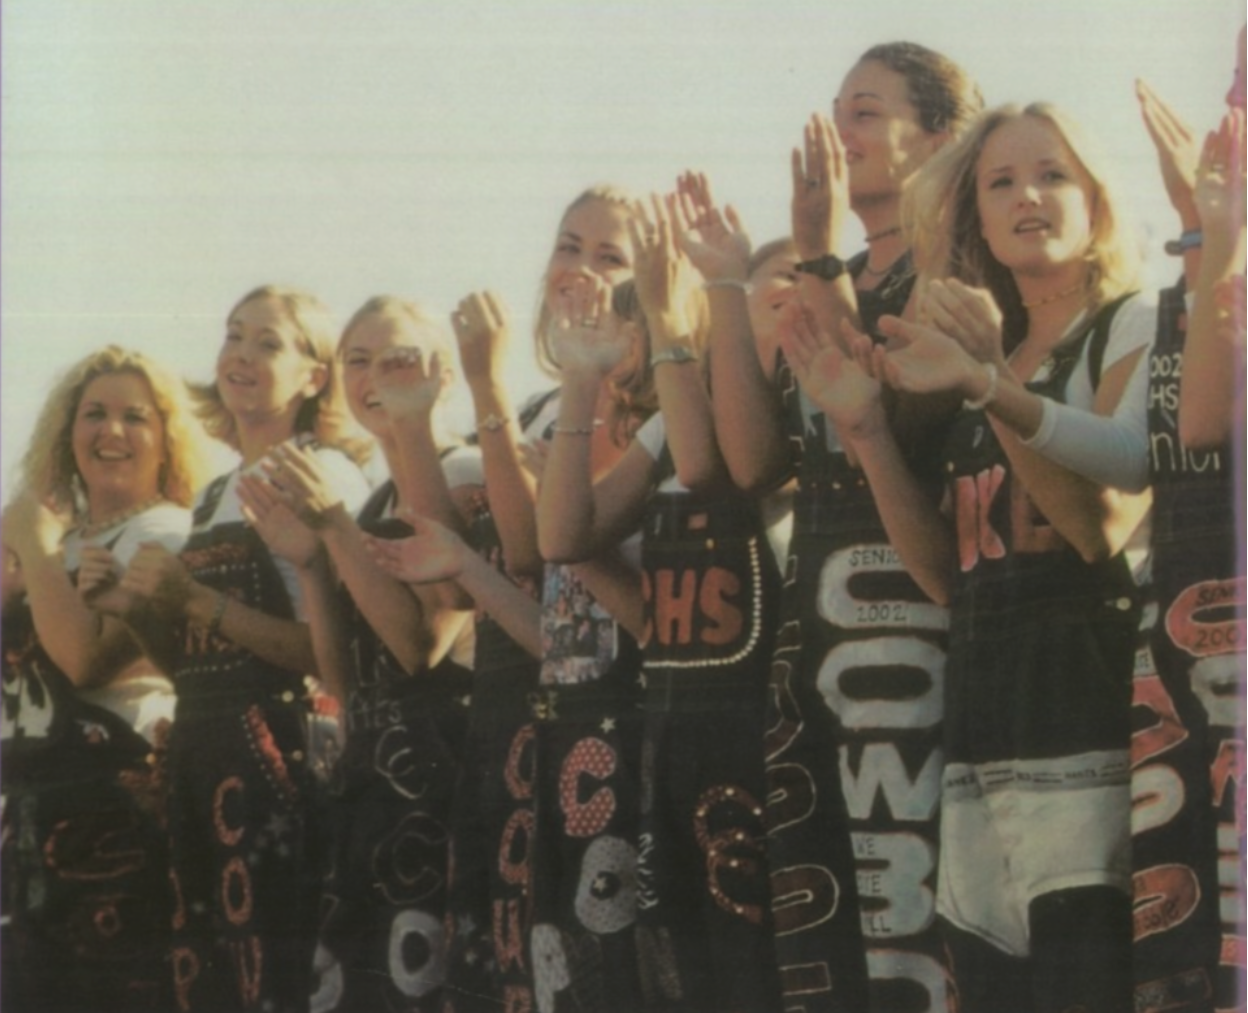 Coppell High School class of 2002  wear their senior overalls in the student section at a pep rally. Senior overalls have been a tradition since the early 2000s as a way for senior girls to represent their school spirit and pride in Coppell. 